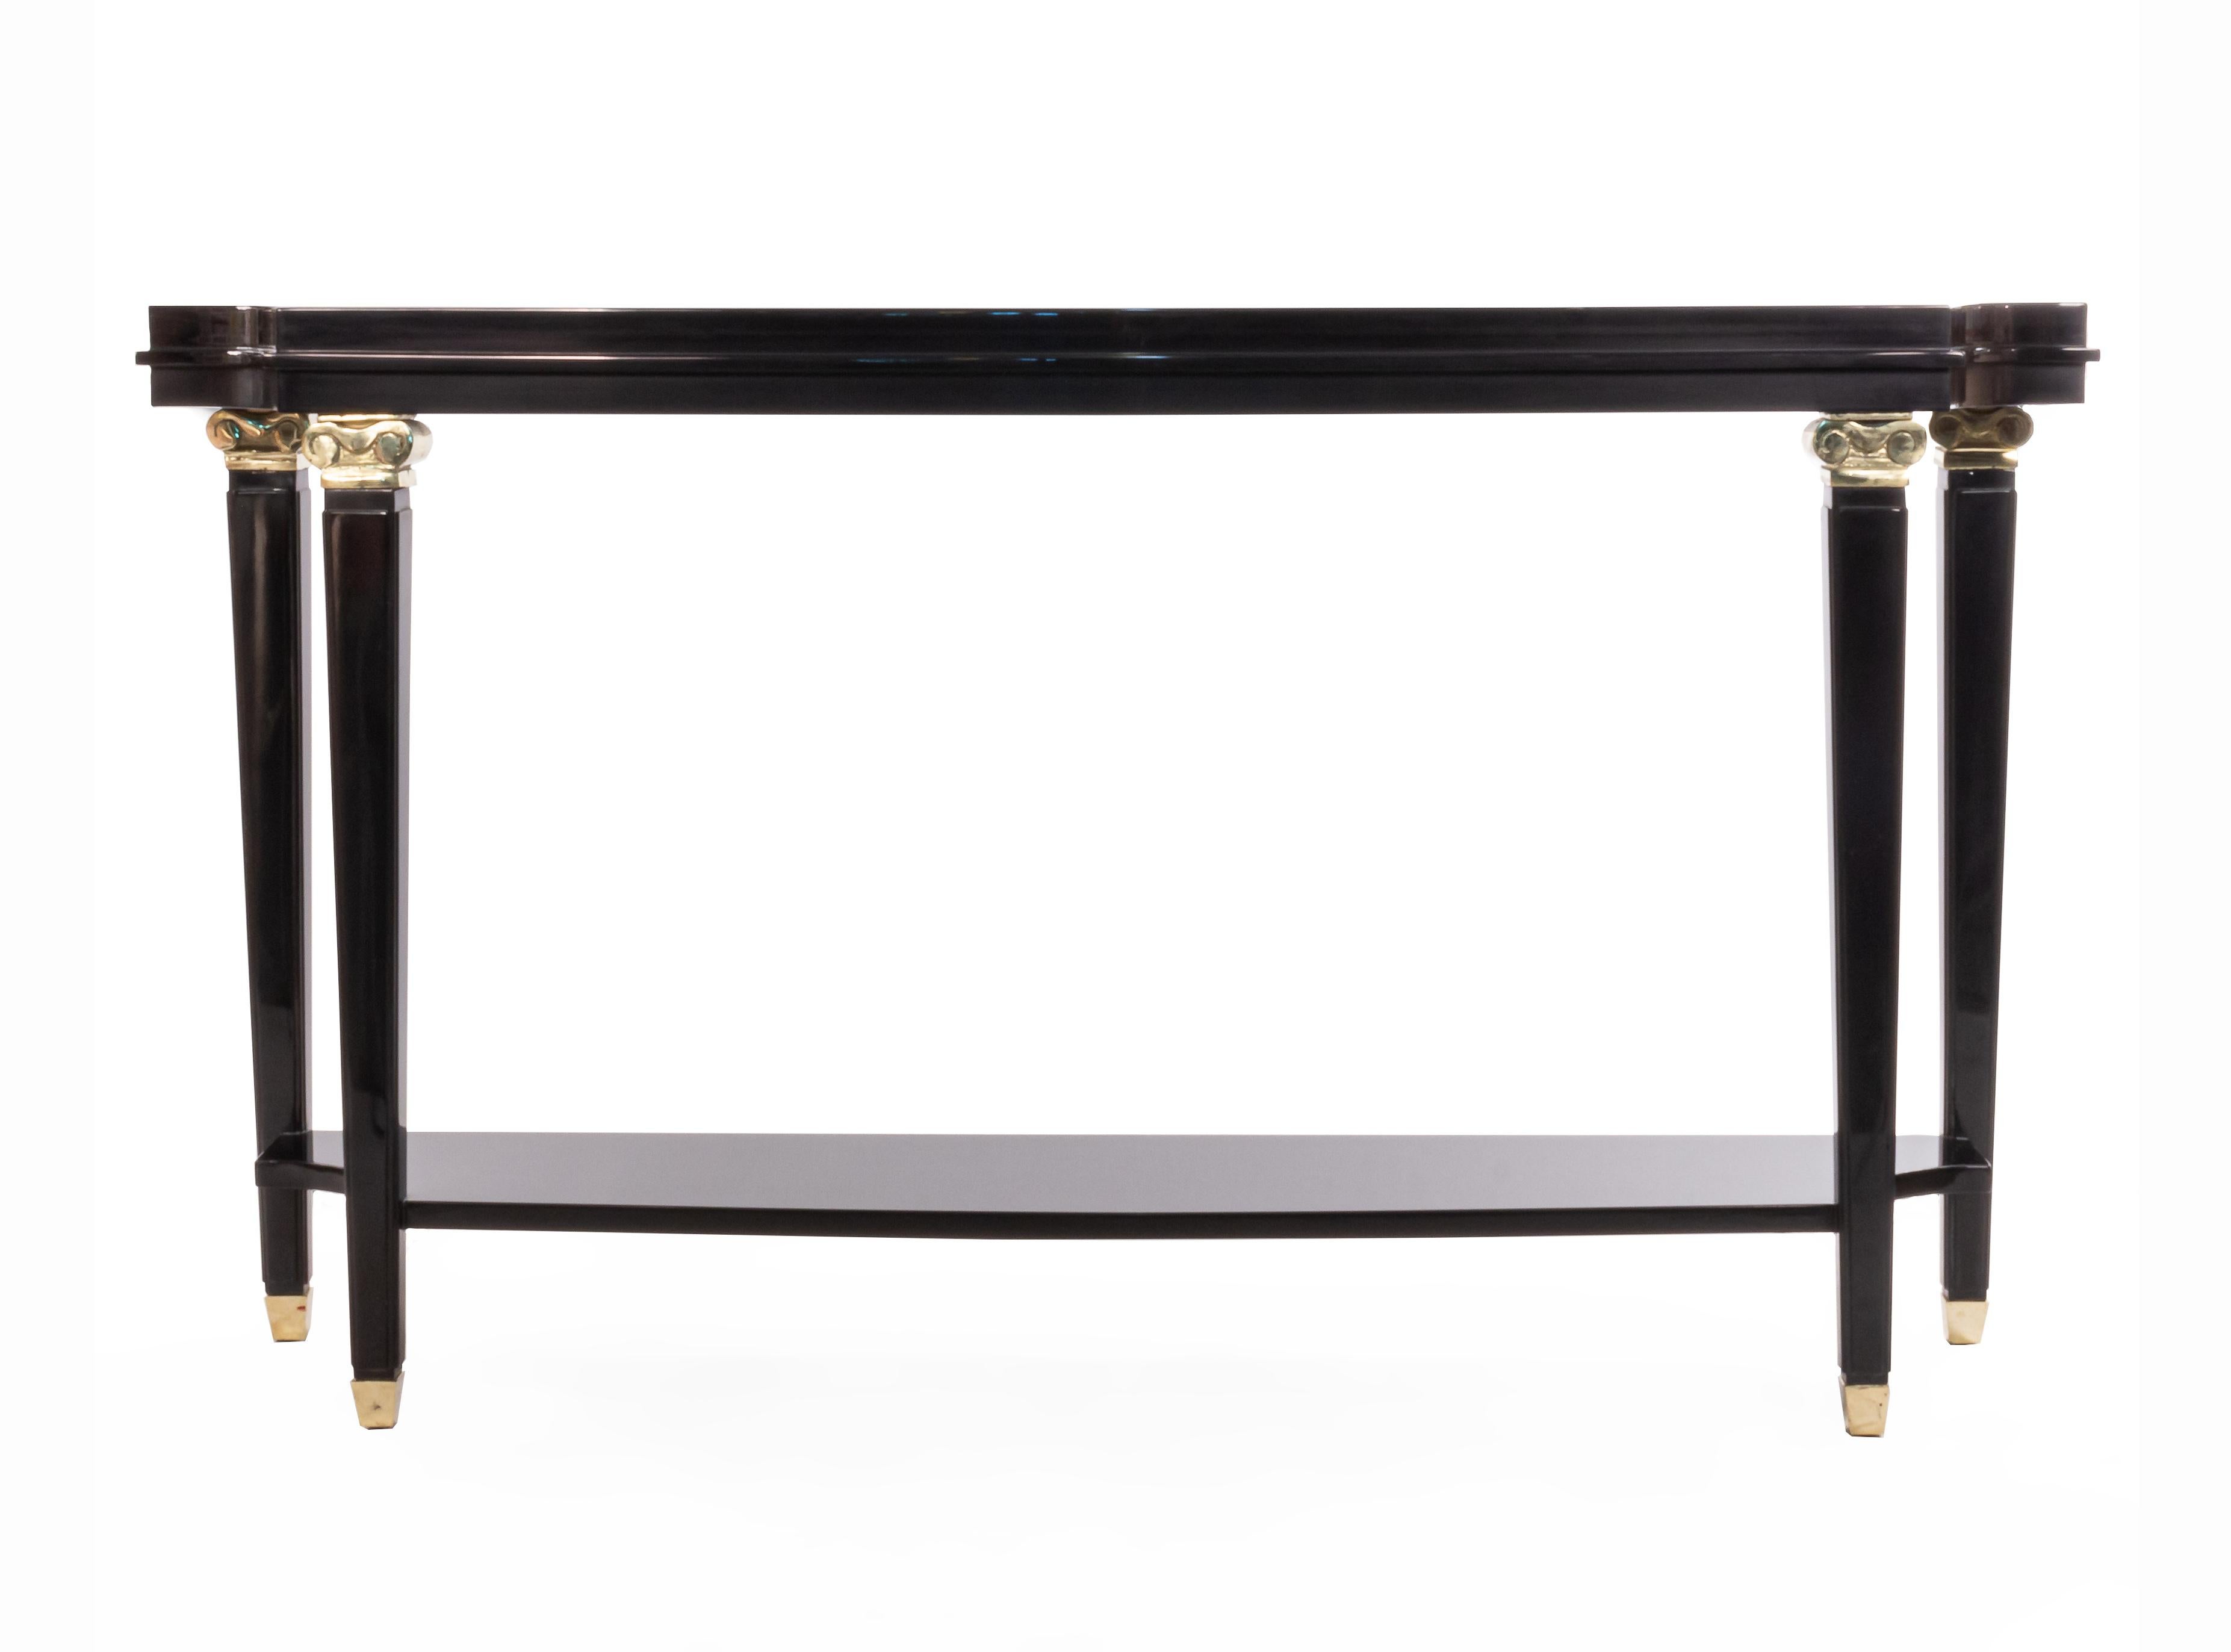 French 1940s Lucien Rollin-style black lacquer shaped top console table with shelf and bronze capital trim on legs.